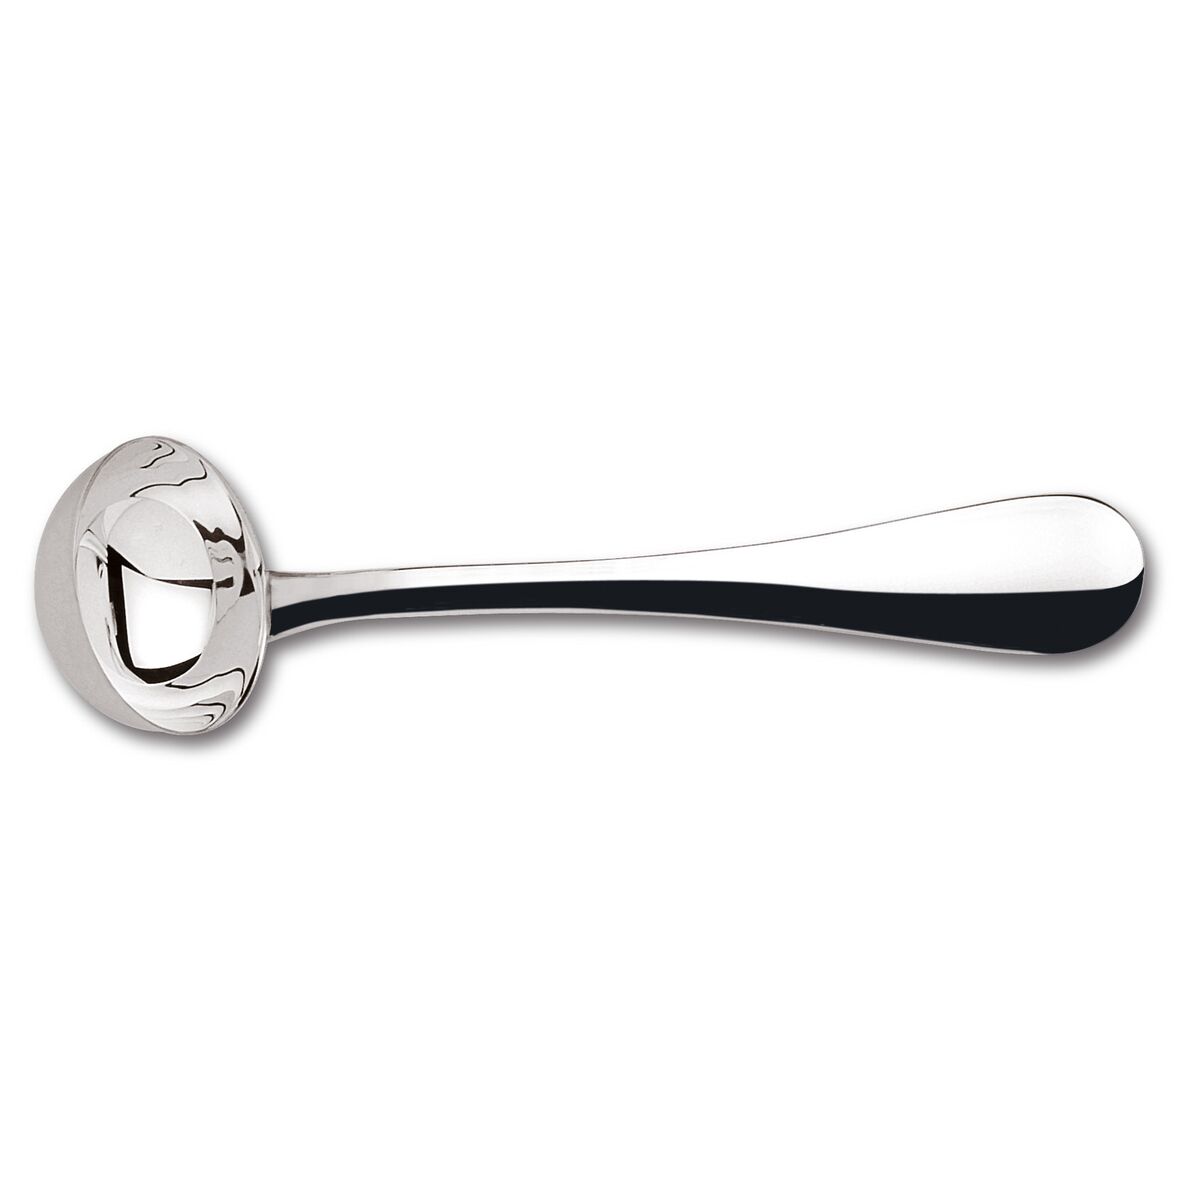 Tramontina 63960/217 Essential Sauce Ladle Stainless Steel